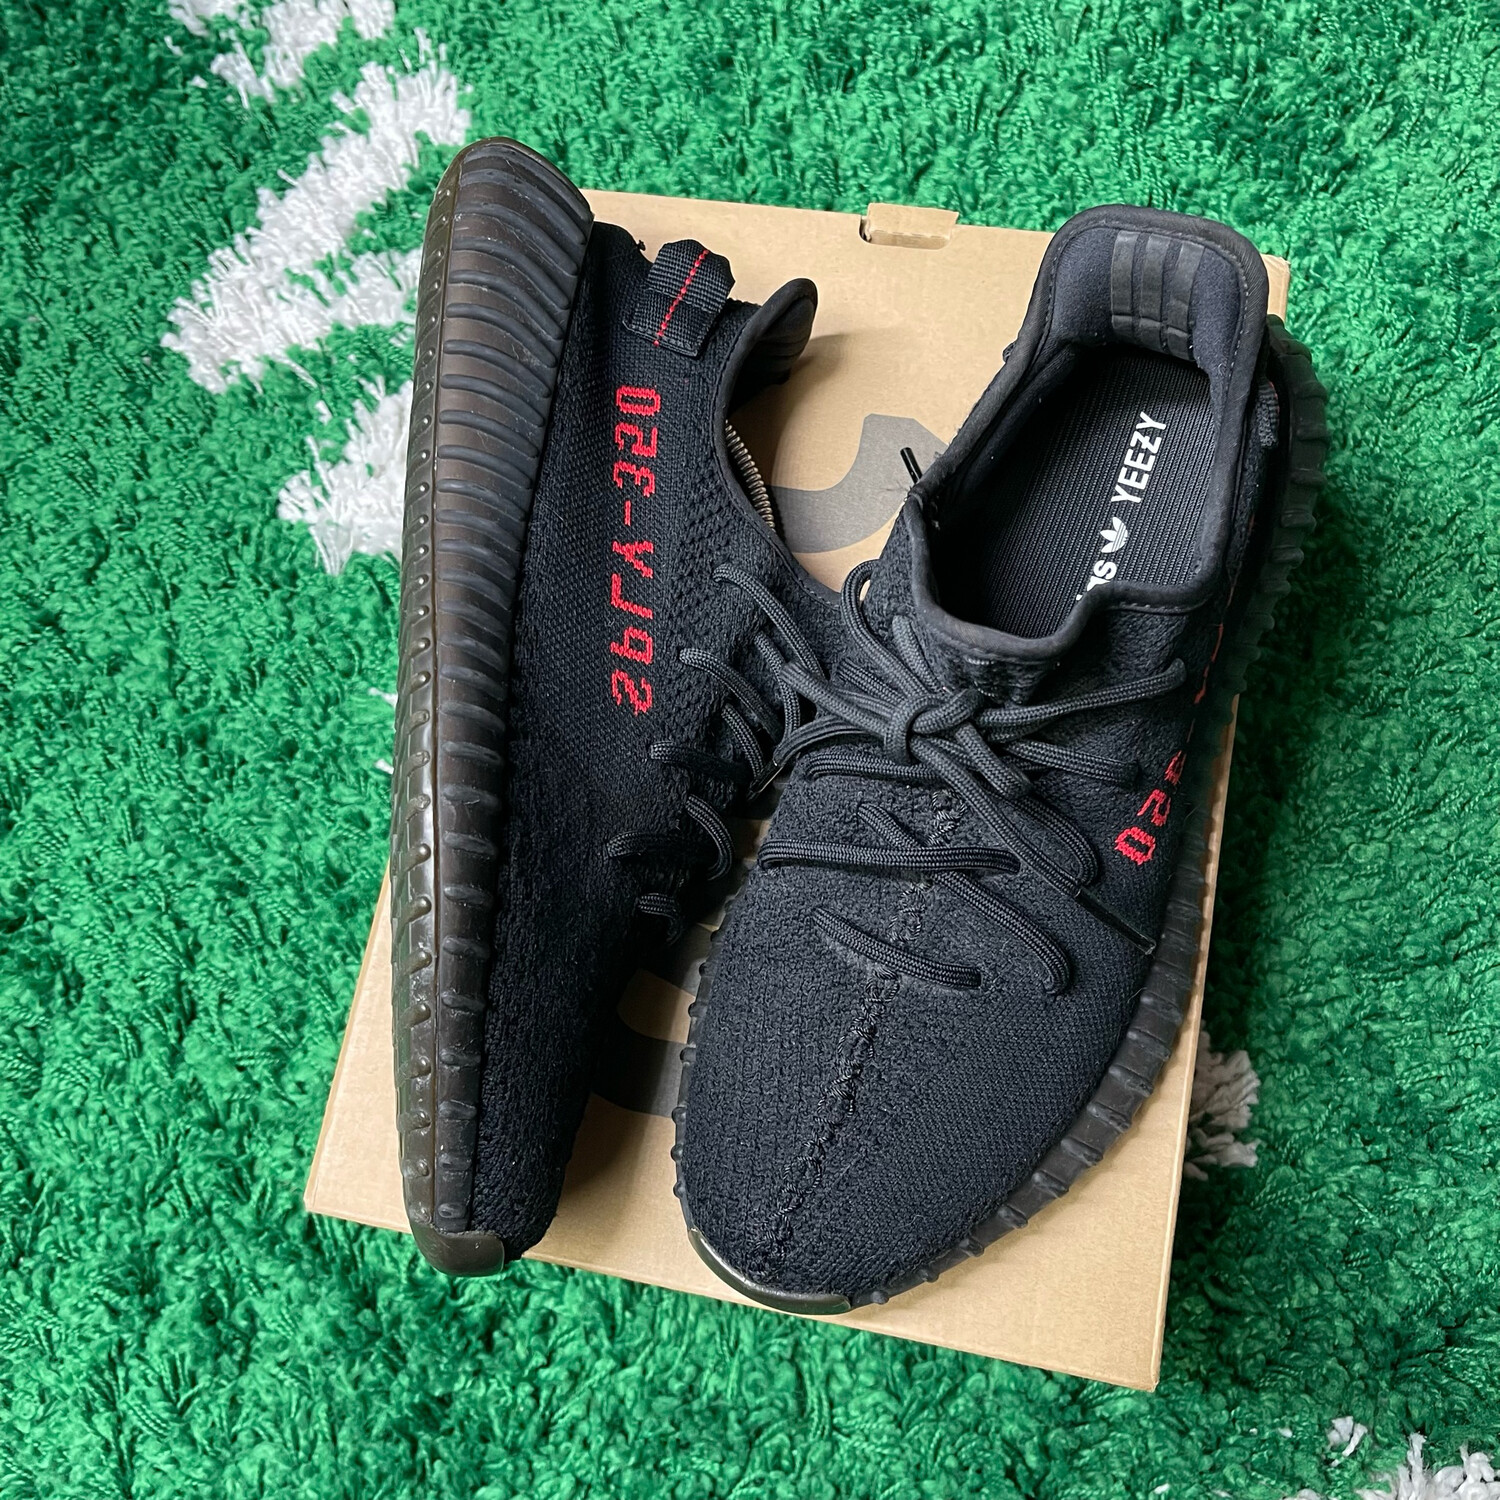 Adidas Yeezy Boost 350 V2 Bred Size 10.5